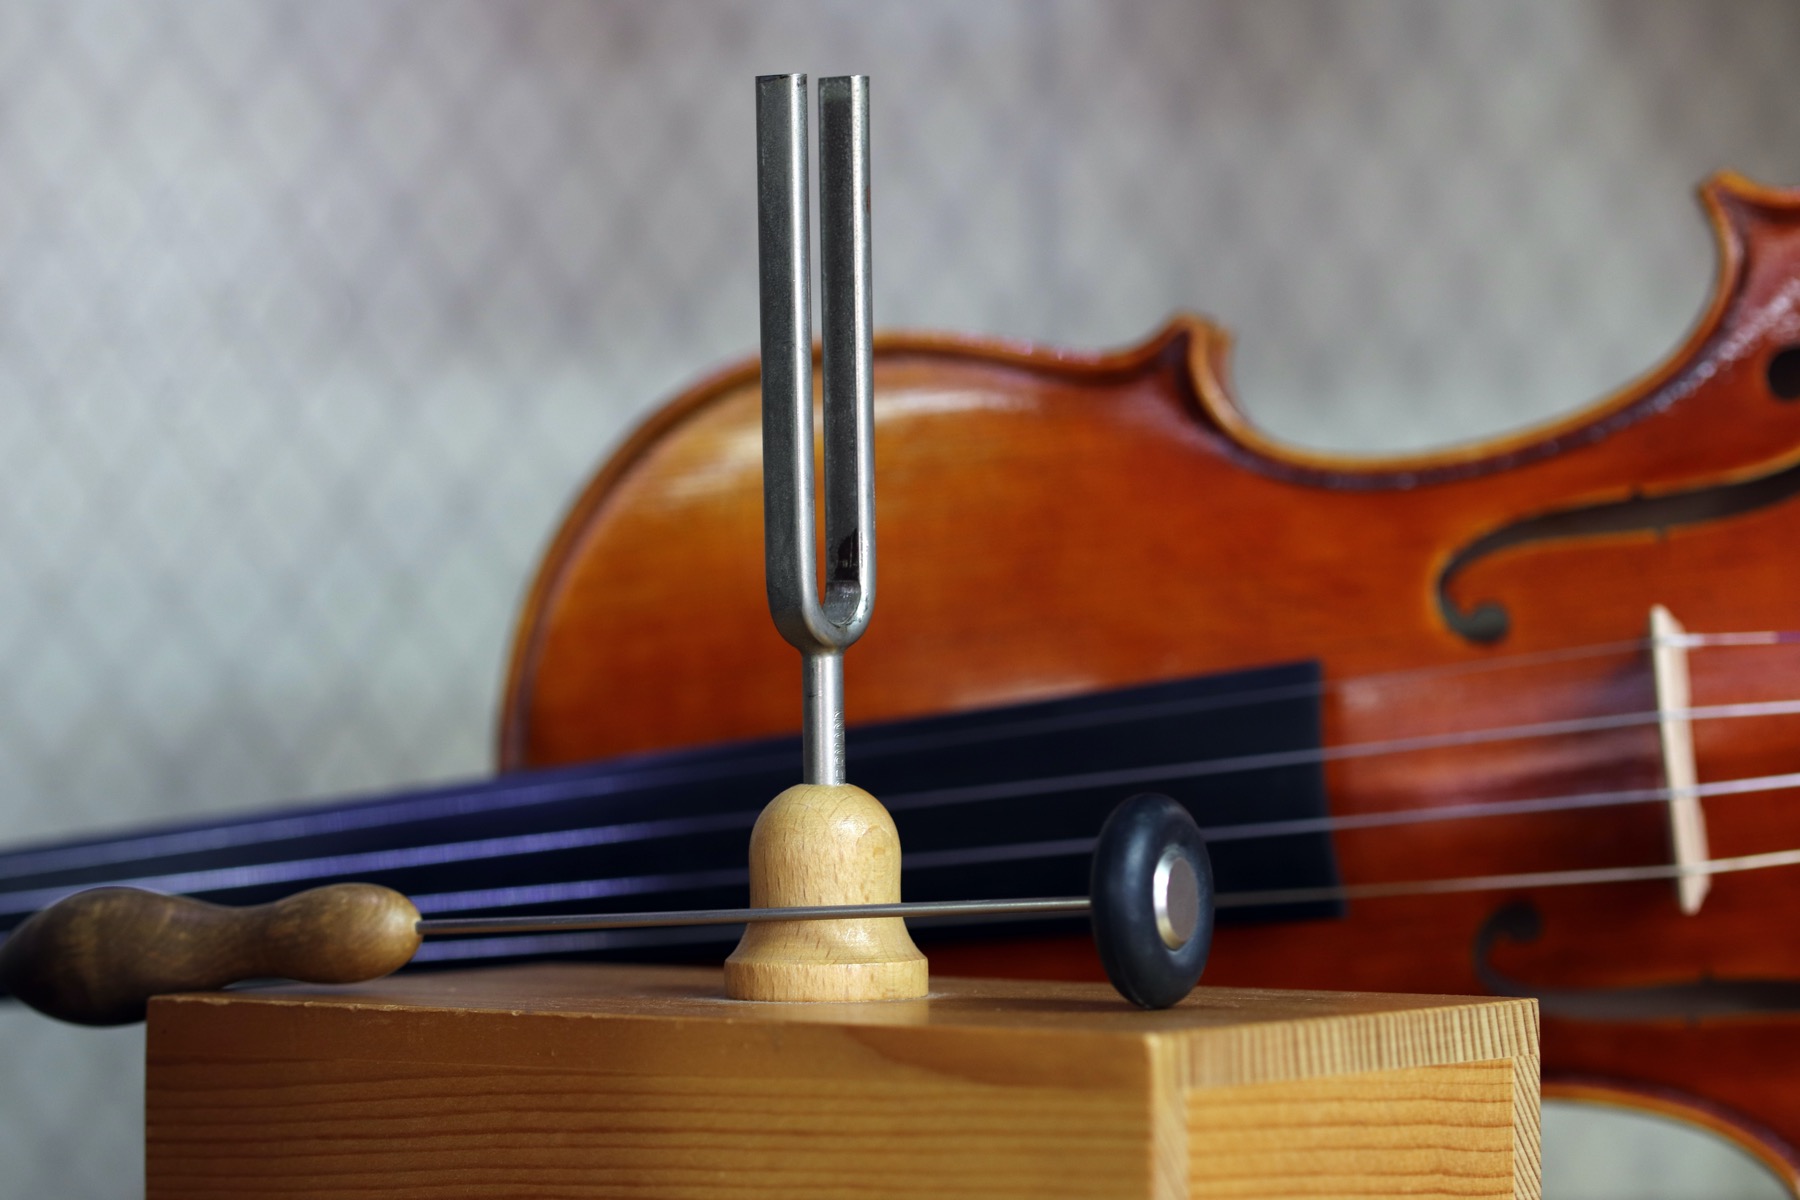 Violin beside a tuning fork